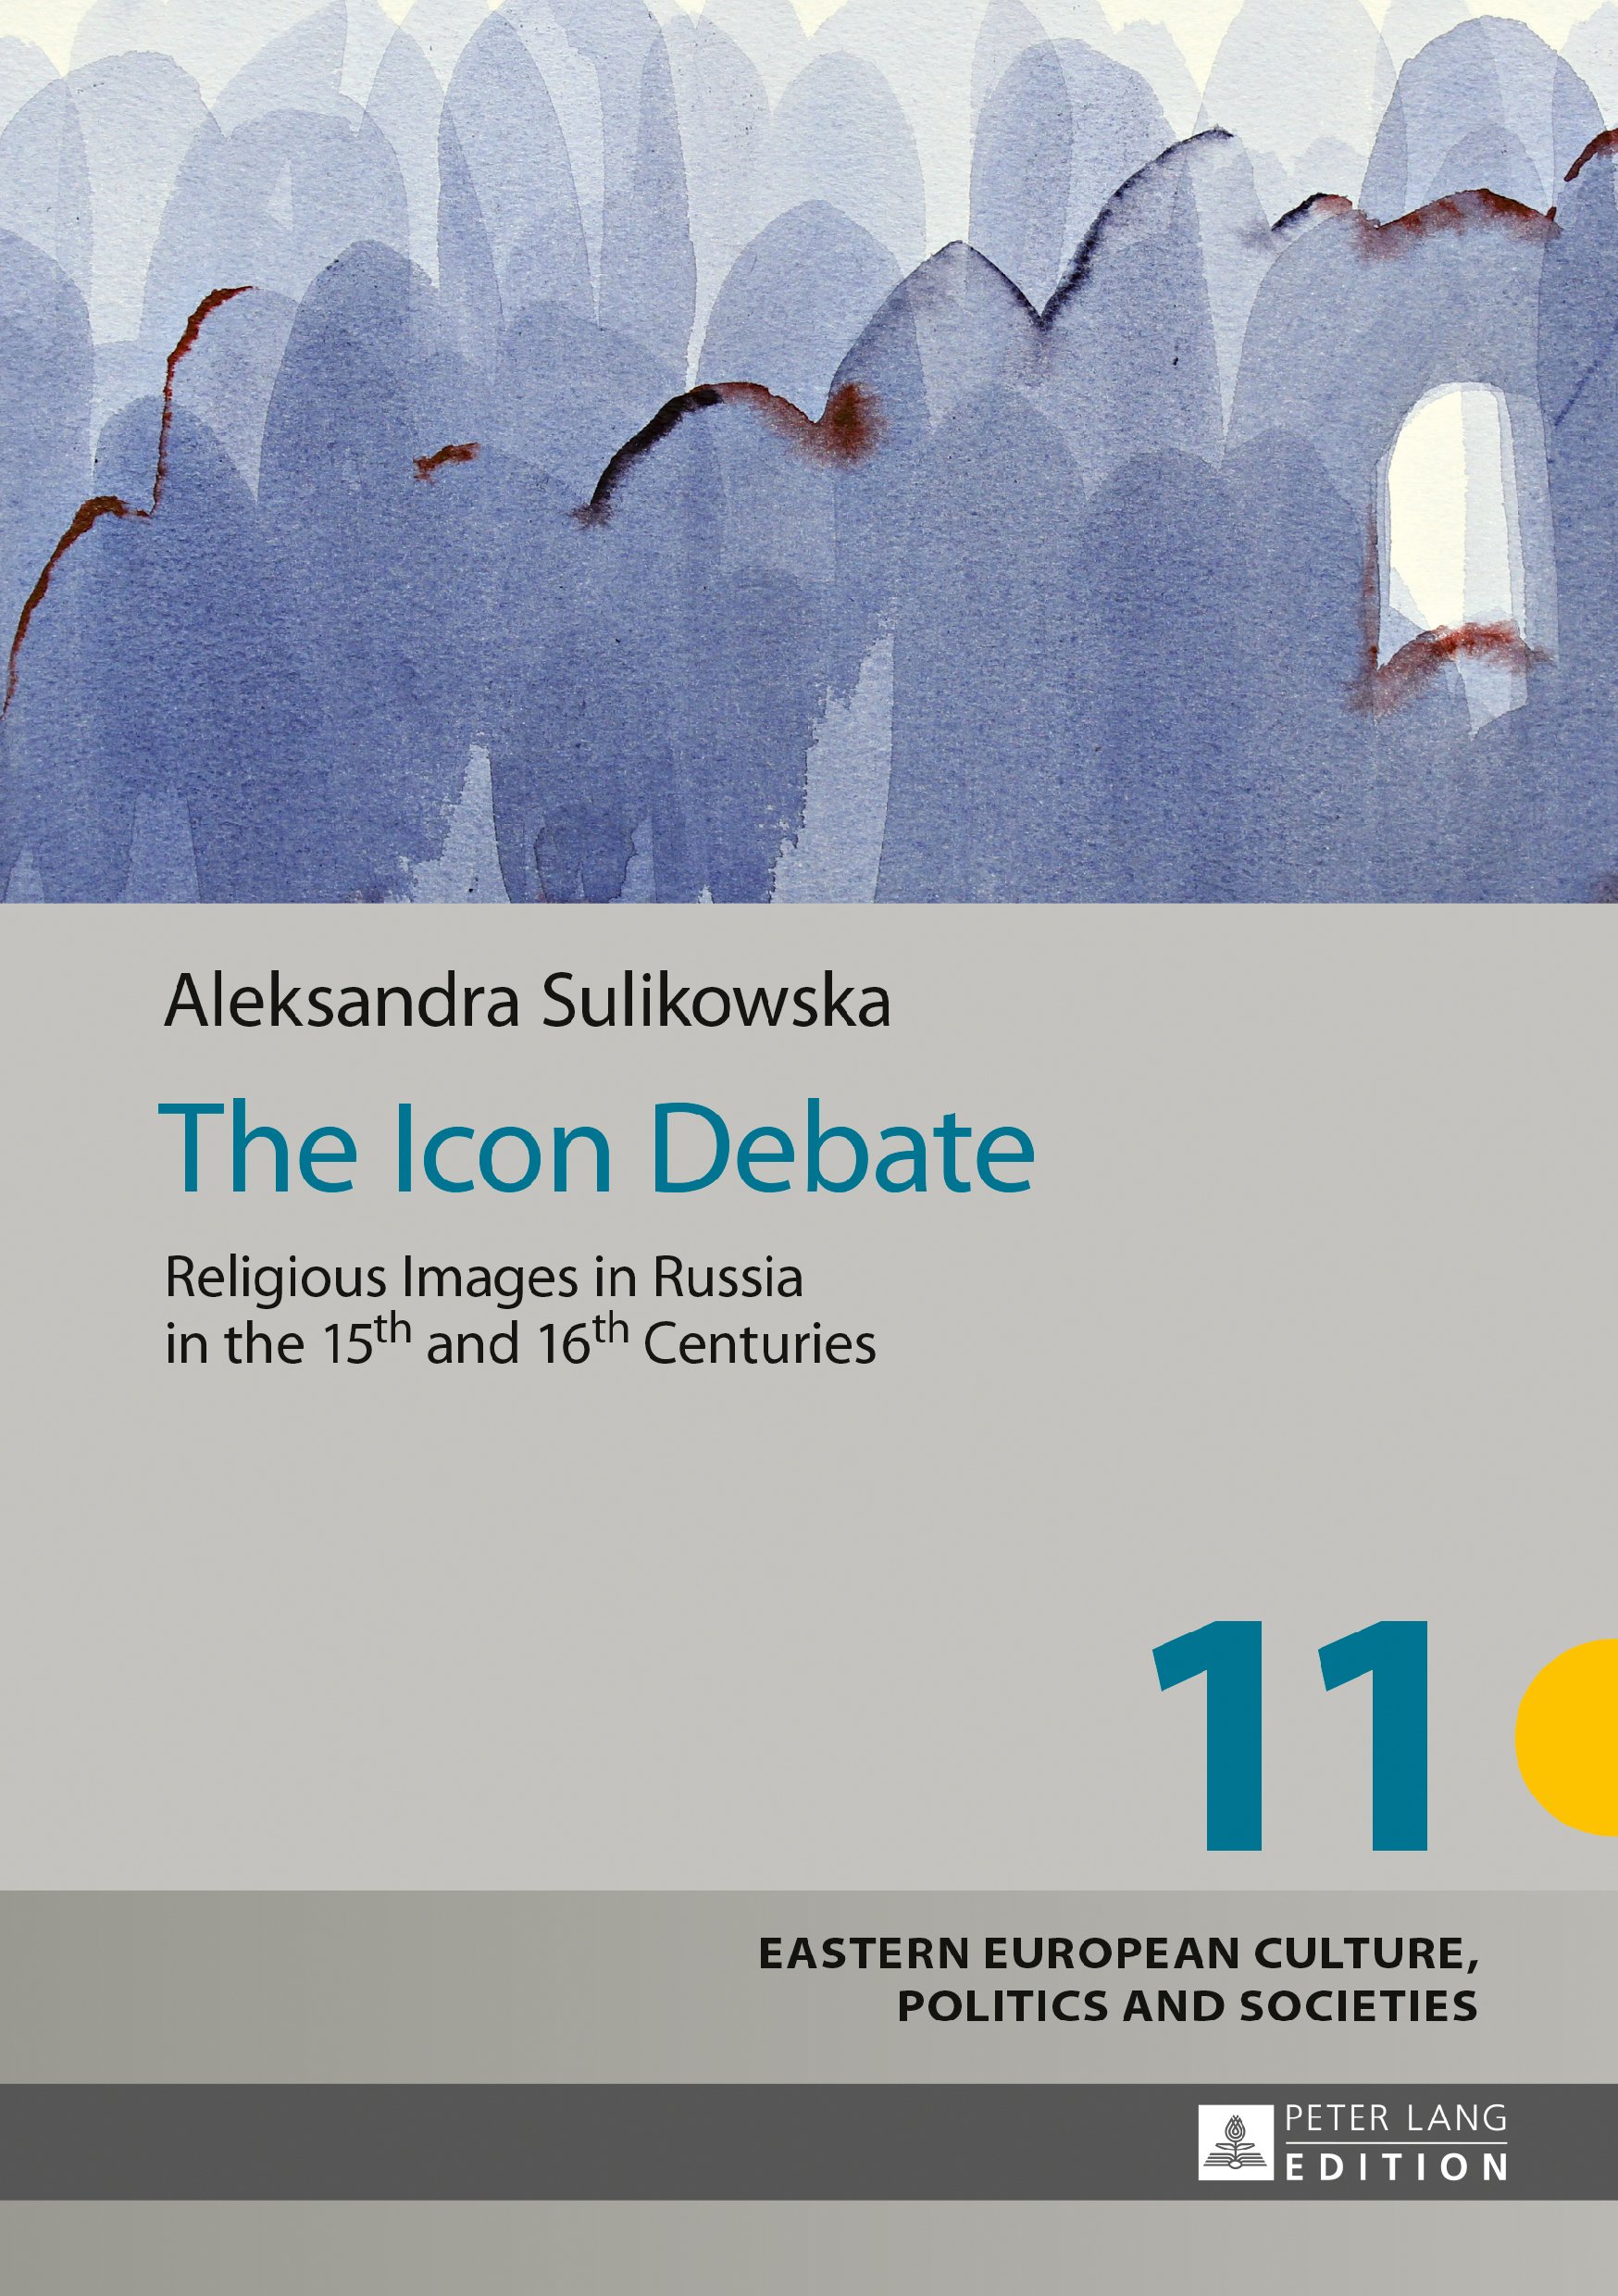 Review of A. Sulikowska, <i>The Icon Debate: Religious Images in Russia in the 15th and 16th Centuries</i> (New York: Peter Lang, 2016), in <i>Zeitschrift für Ostmitteleuropa-Forschung</i> 67, no. 2 (2018): 261-262. [J. Olchawa]